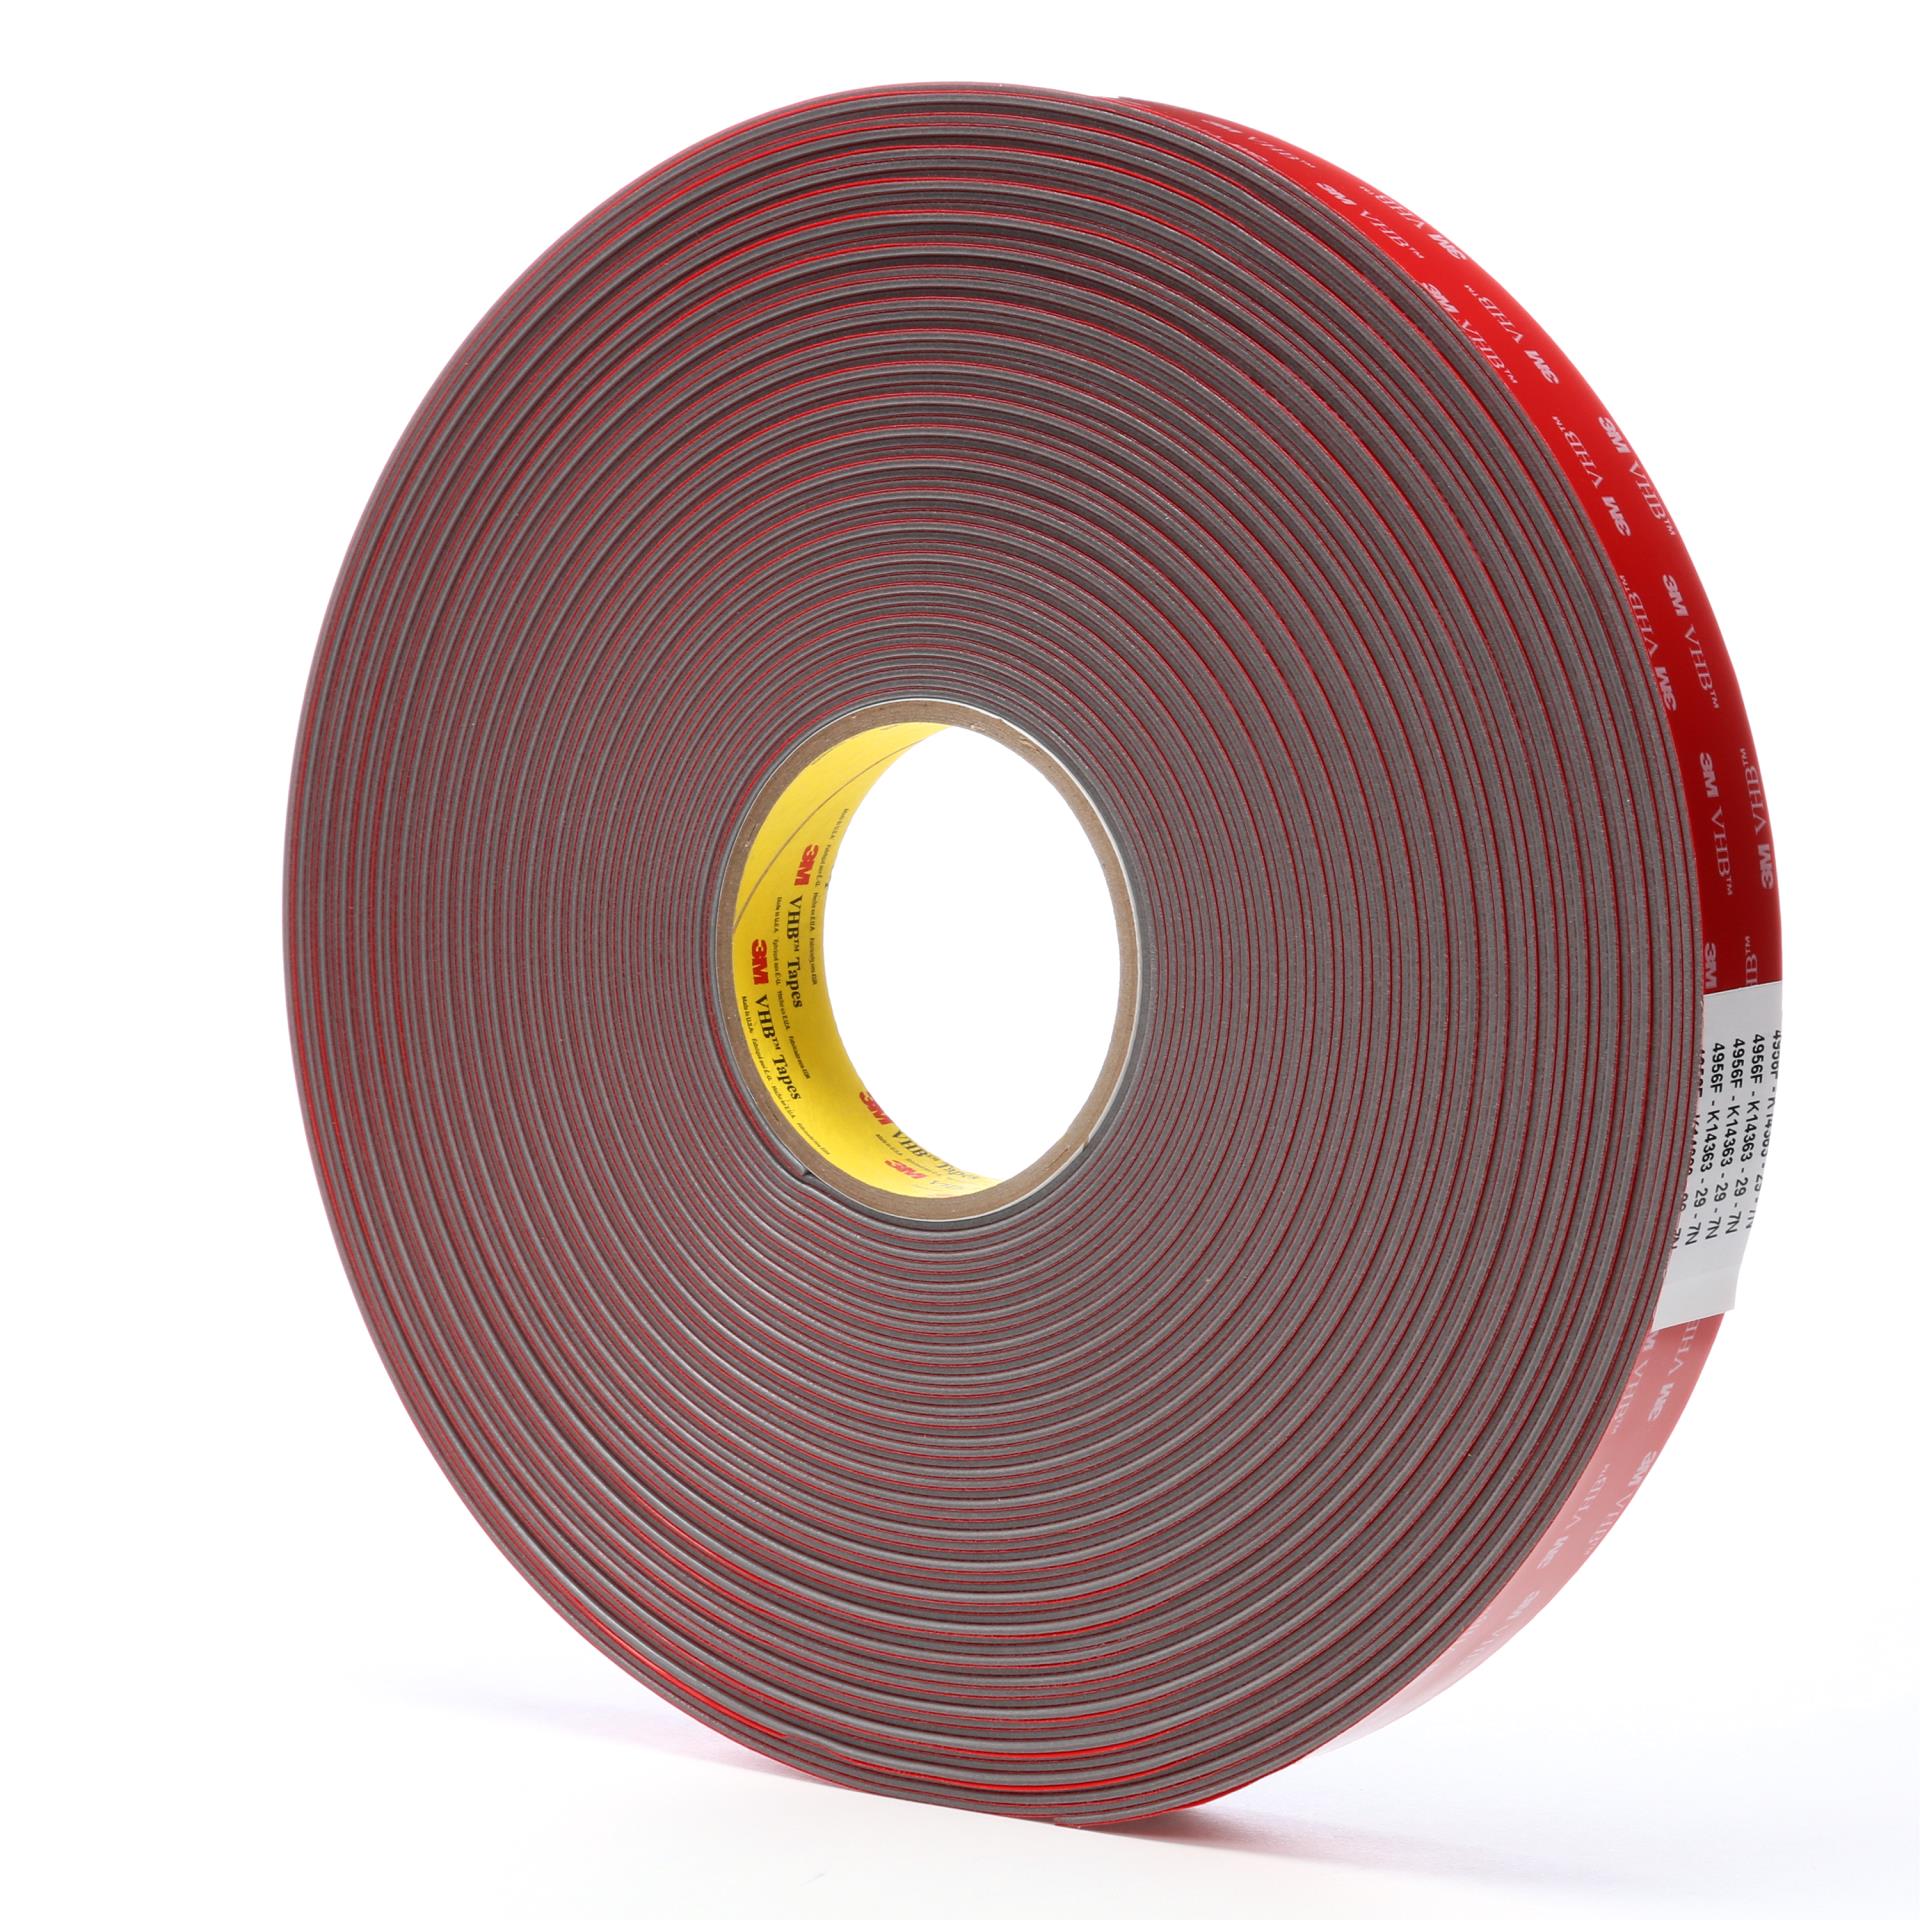 00051115810442 3M™ VHB™ Tape 4956F, Gray, 48 in x 36 yd, 62 mil, Film  Liner, roll per case Aircraft products tapes 6299354